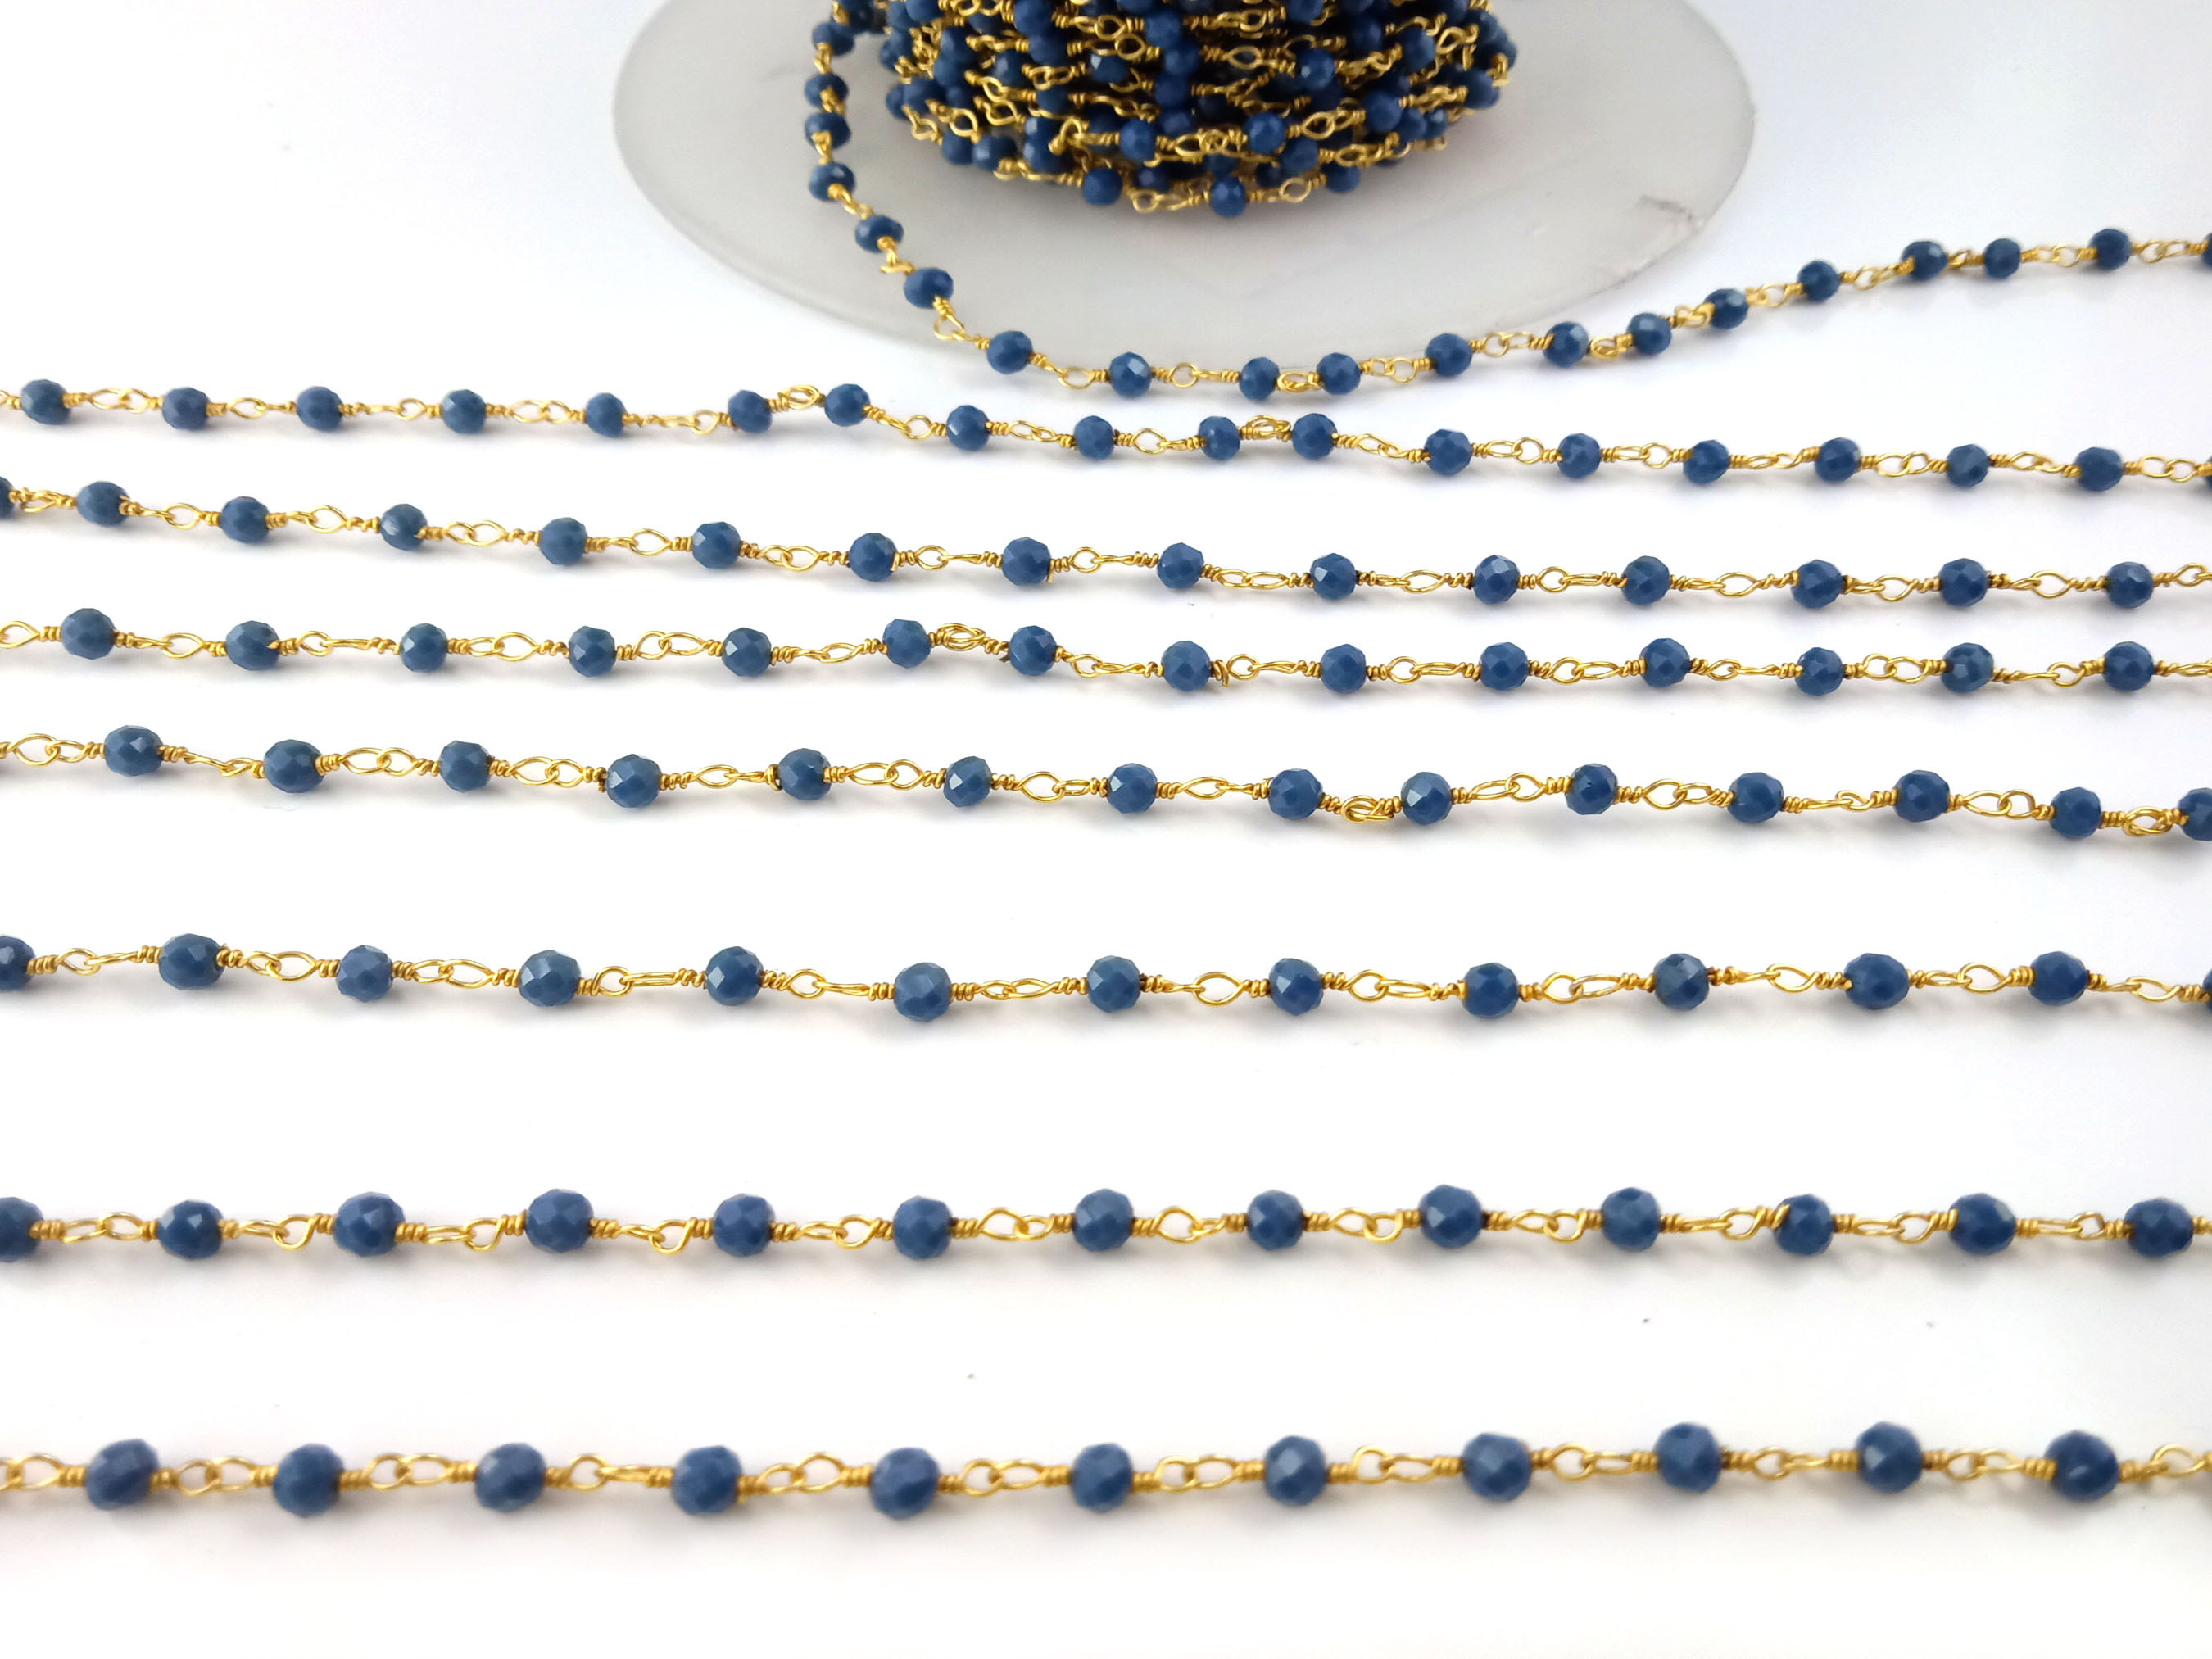 Sapphire Quartz Beaded Chain 3mm Wire Wrapped Rosary - Blue Sapphire Rosary Beaded Rosary Chain - Beaded Chain Jewelry